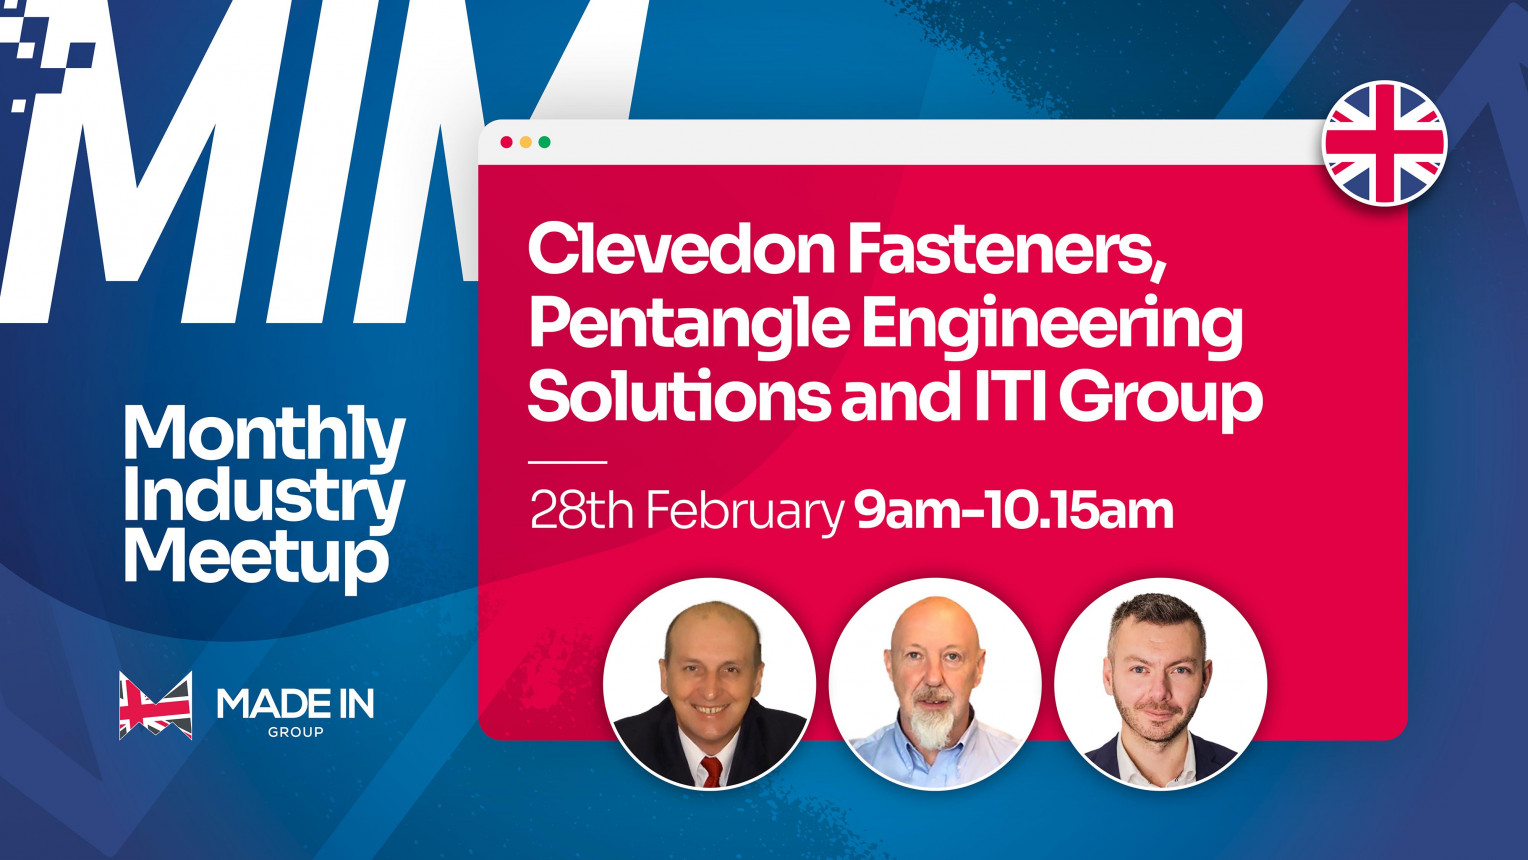 Monthly Industry Meet-Up with Clevedon Fasteners, Pentangle Engineering Services and ITI Group